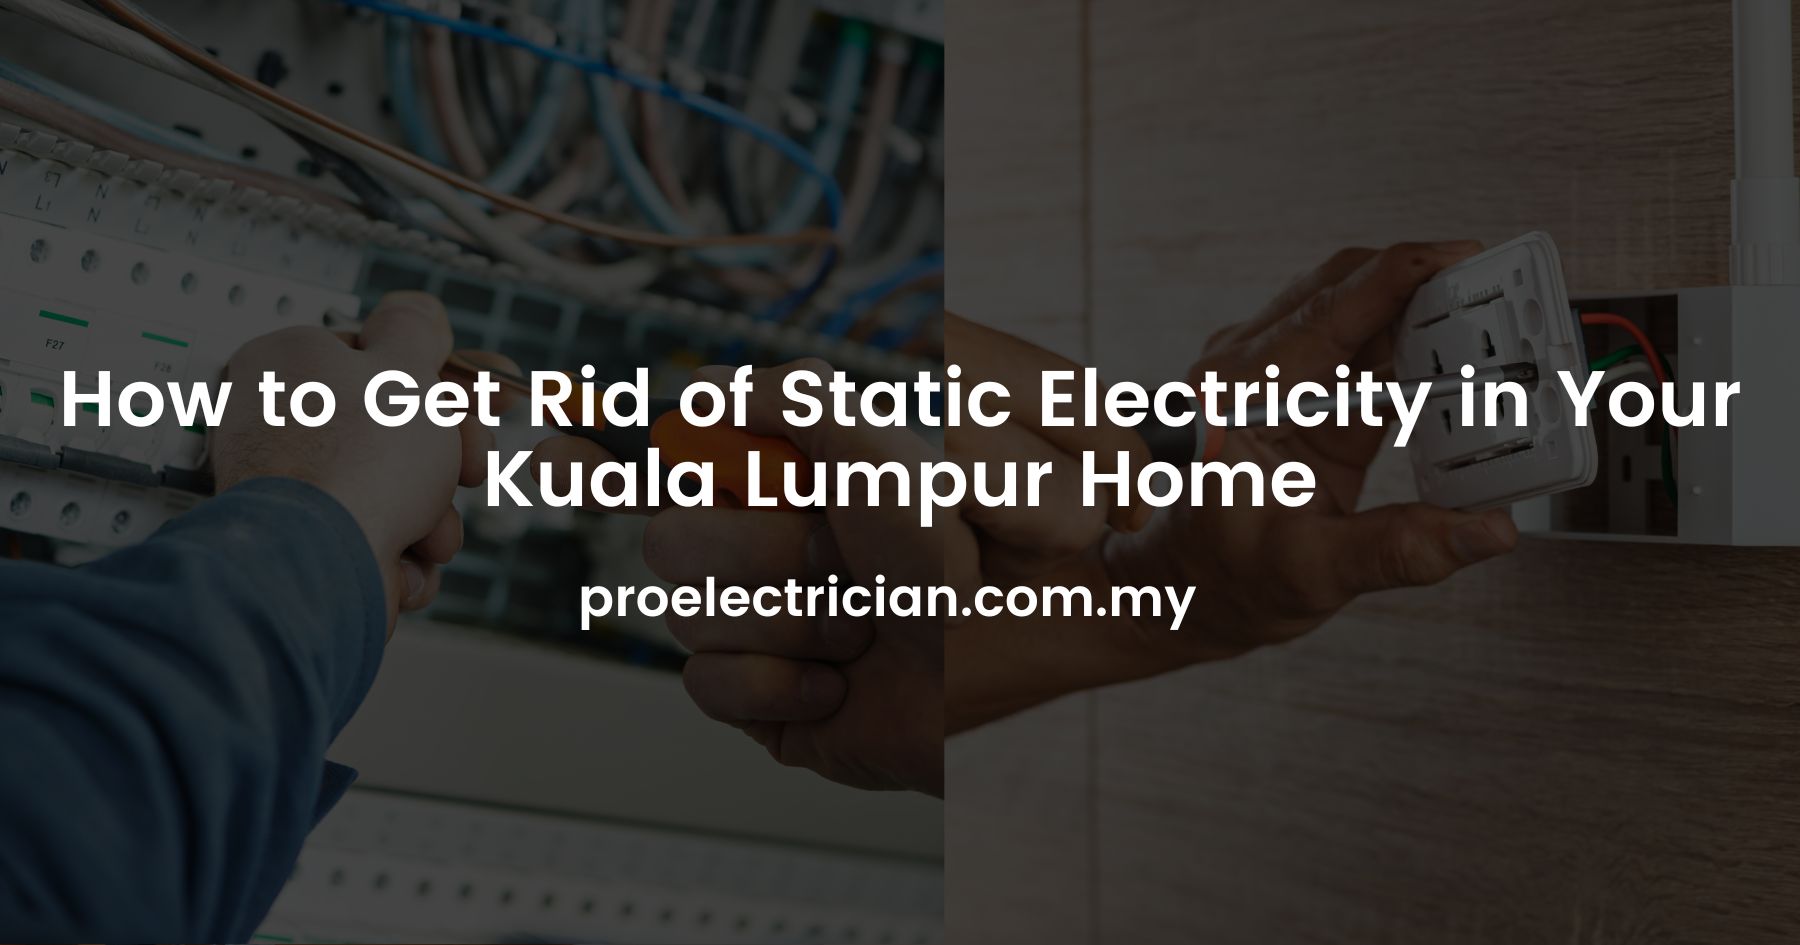 How to Get Rid of Static Electricity in Your Kuala Lumpur Home